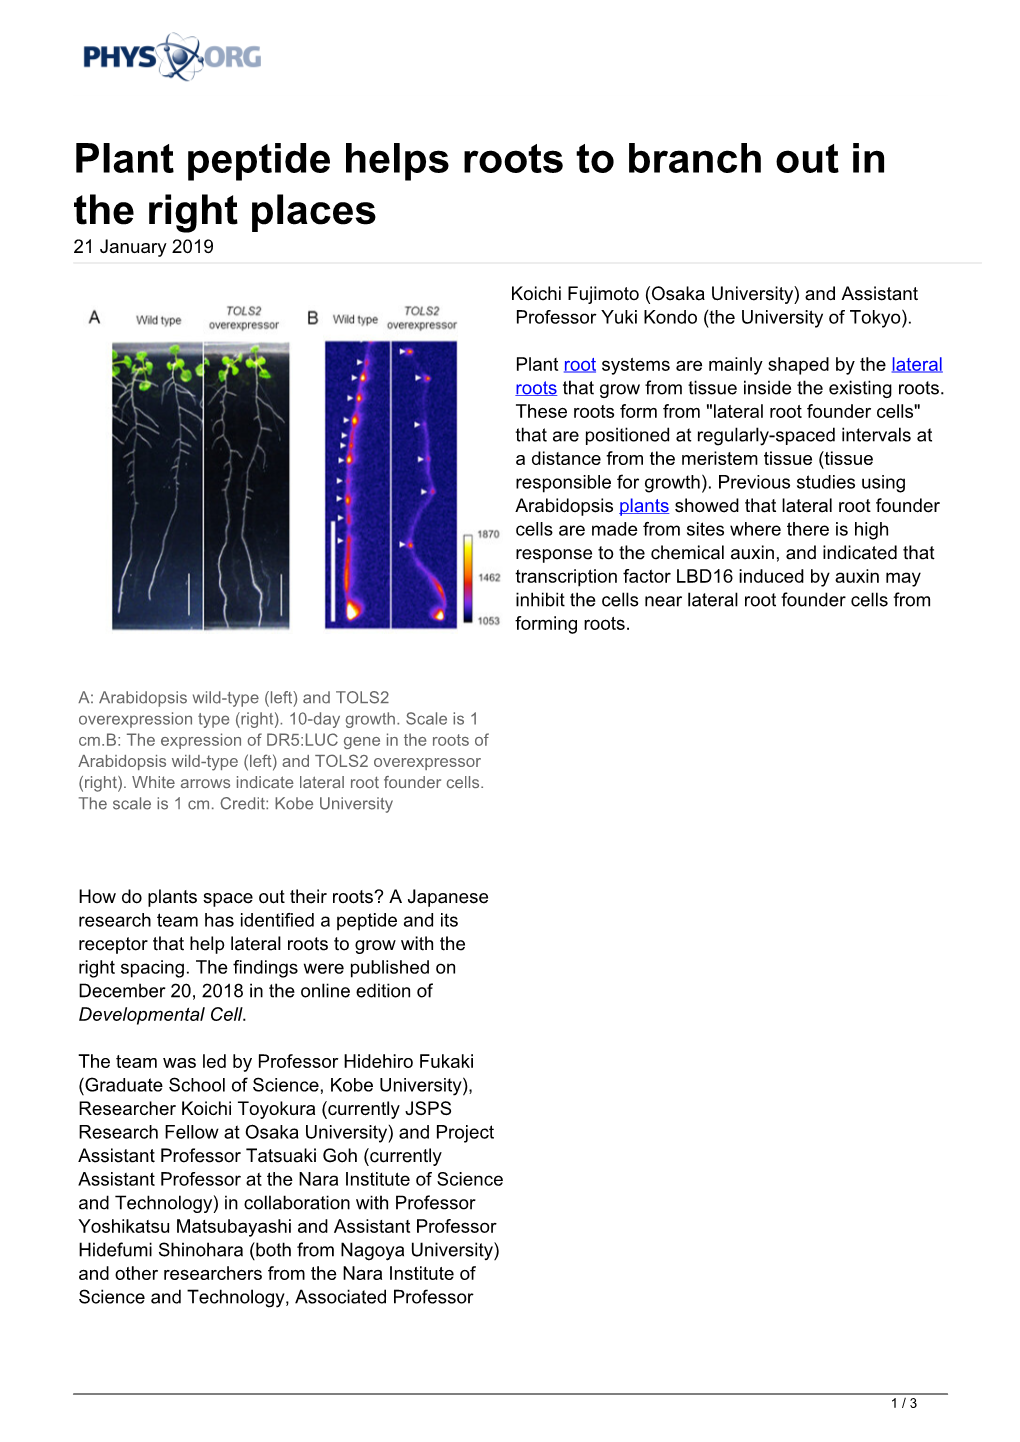 Plant Peptide Helps Roots to Branch out in the Right Places 21 January 2019